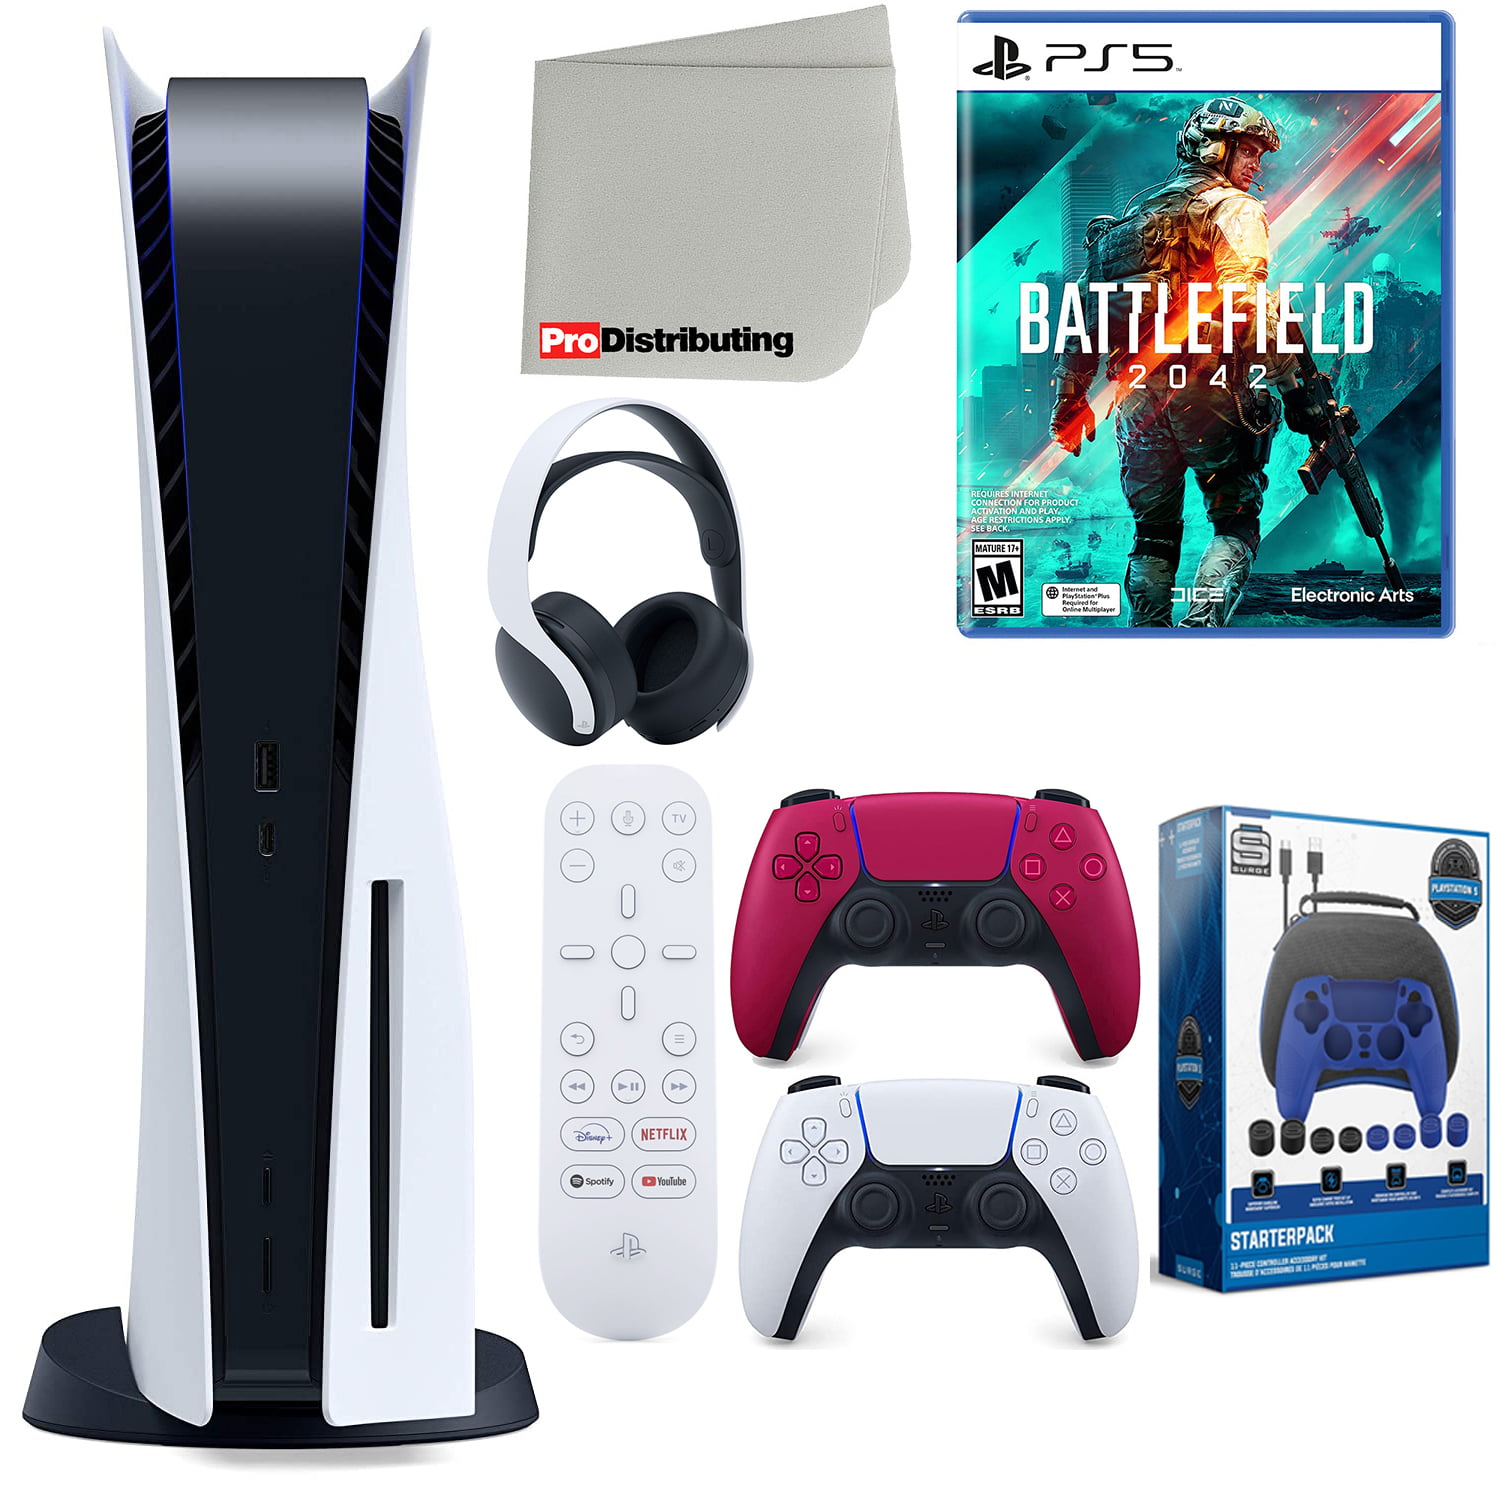 Sony Playstation 5 Disc Version (Sony PS5 Disc) with Cosmic Red Extra Controller, Headset, Media Remote, Battlefield 2042, Accessory Starter Kit and Microfiber Cleaning Cloth Bundle